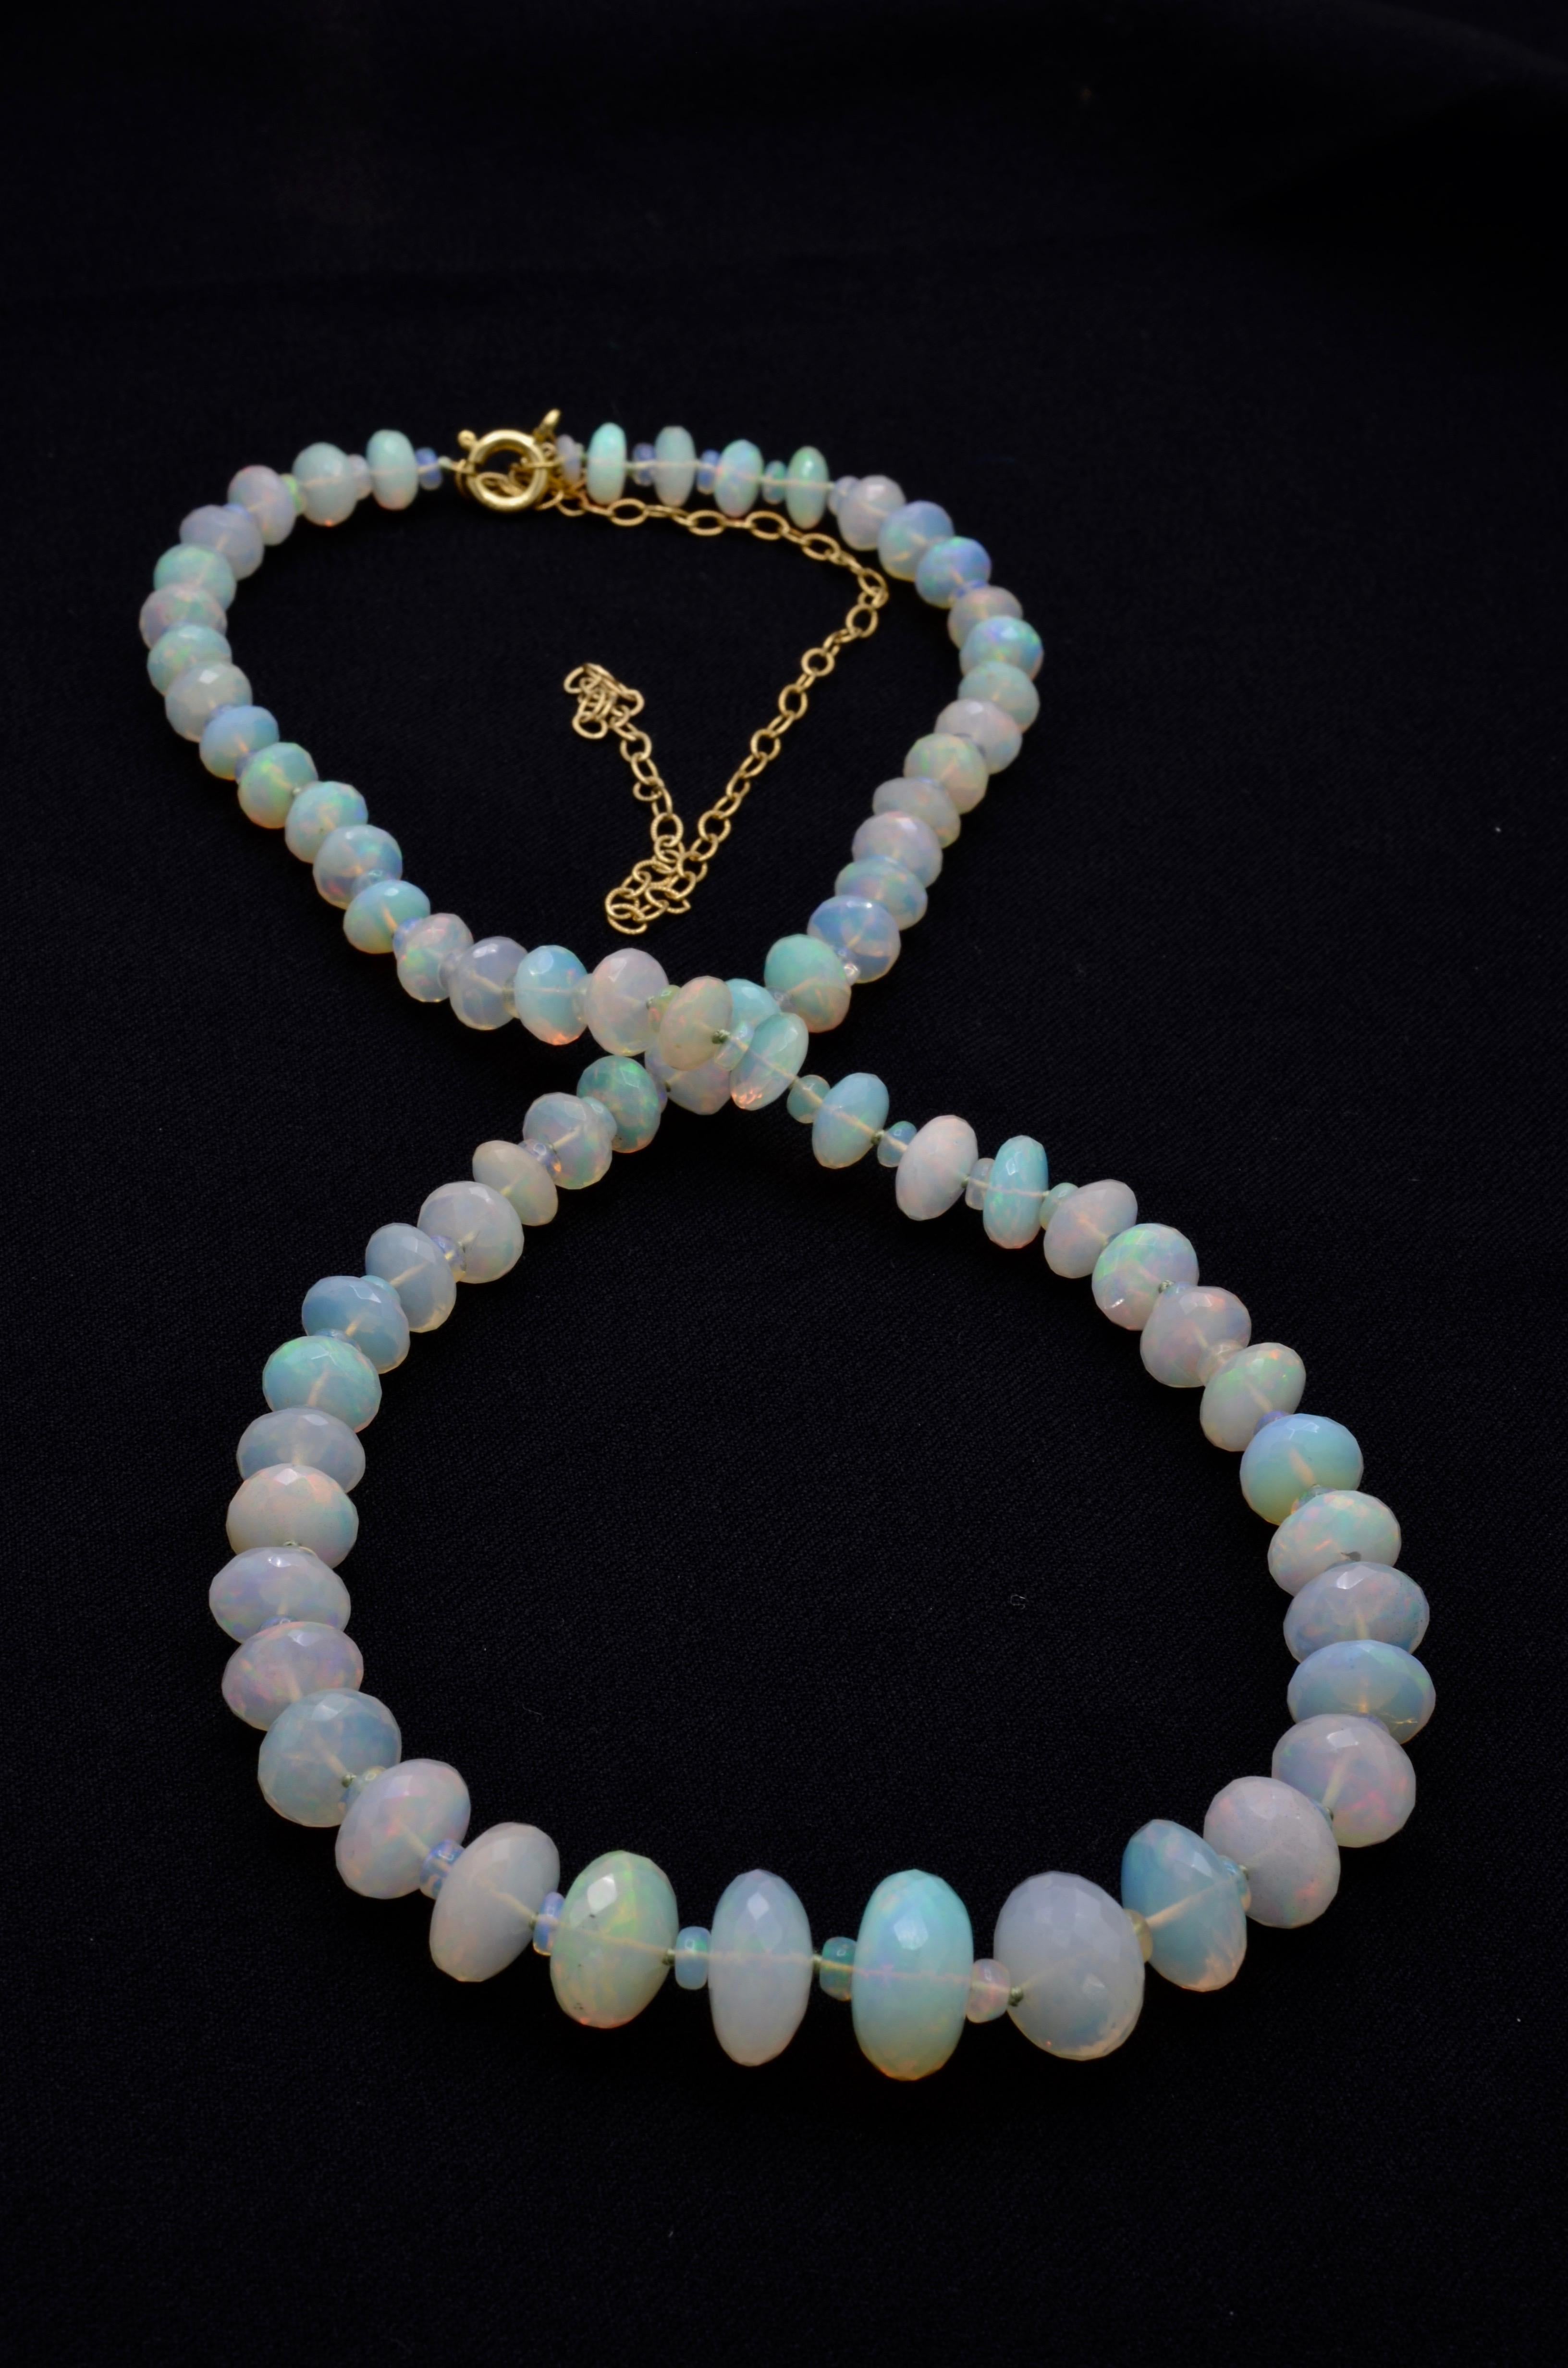 Milky and mysterious these opal faceted beads come from Ethiopia.The facets add sparkle and dimension to the otherworldly glow. Stunning!! There is a 14k gold chain extension so the 19 1/2